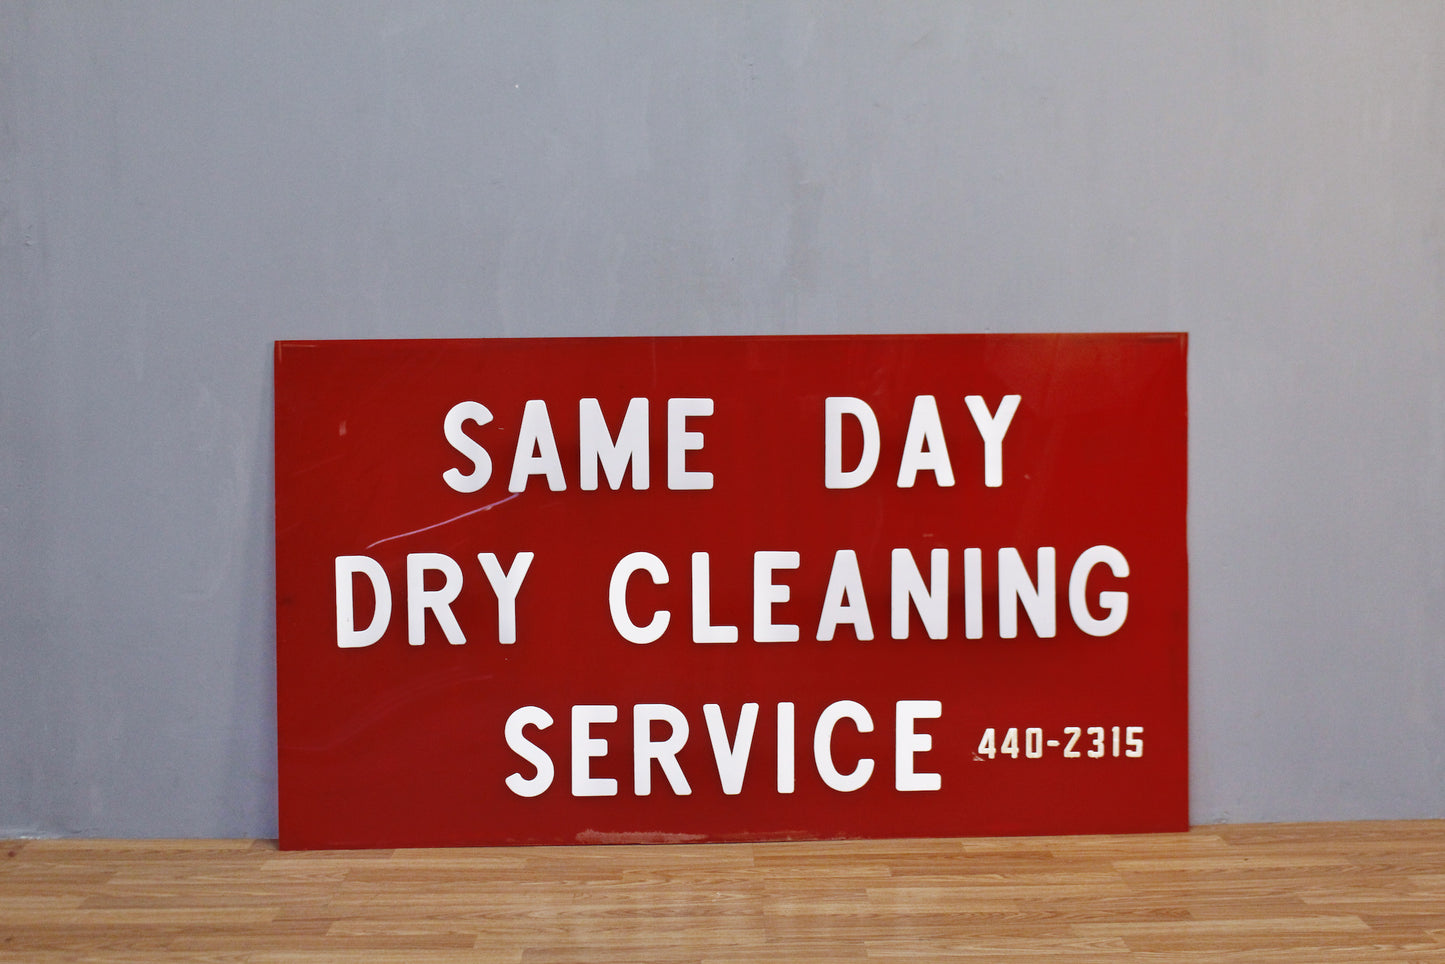 Large "Same Day Dry Cleaning" Sign